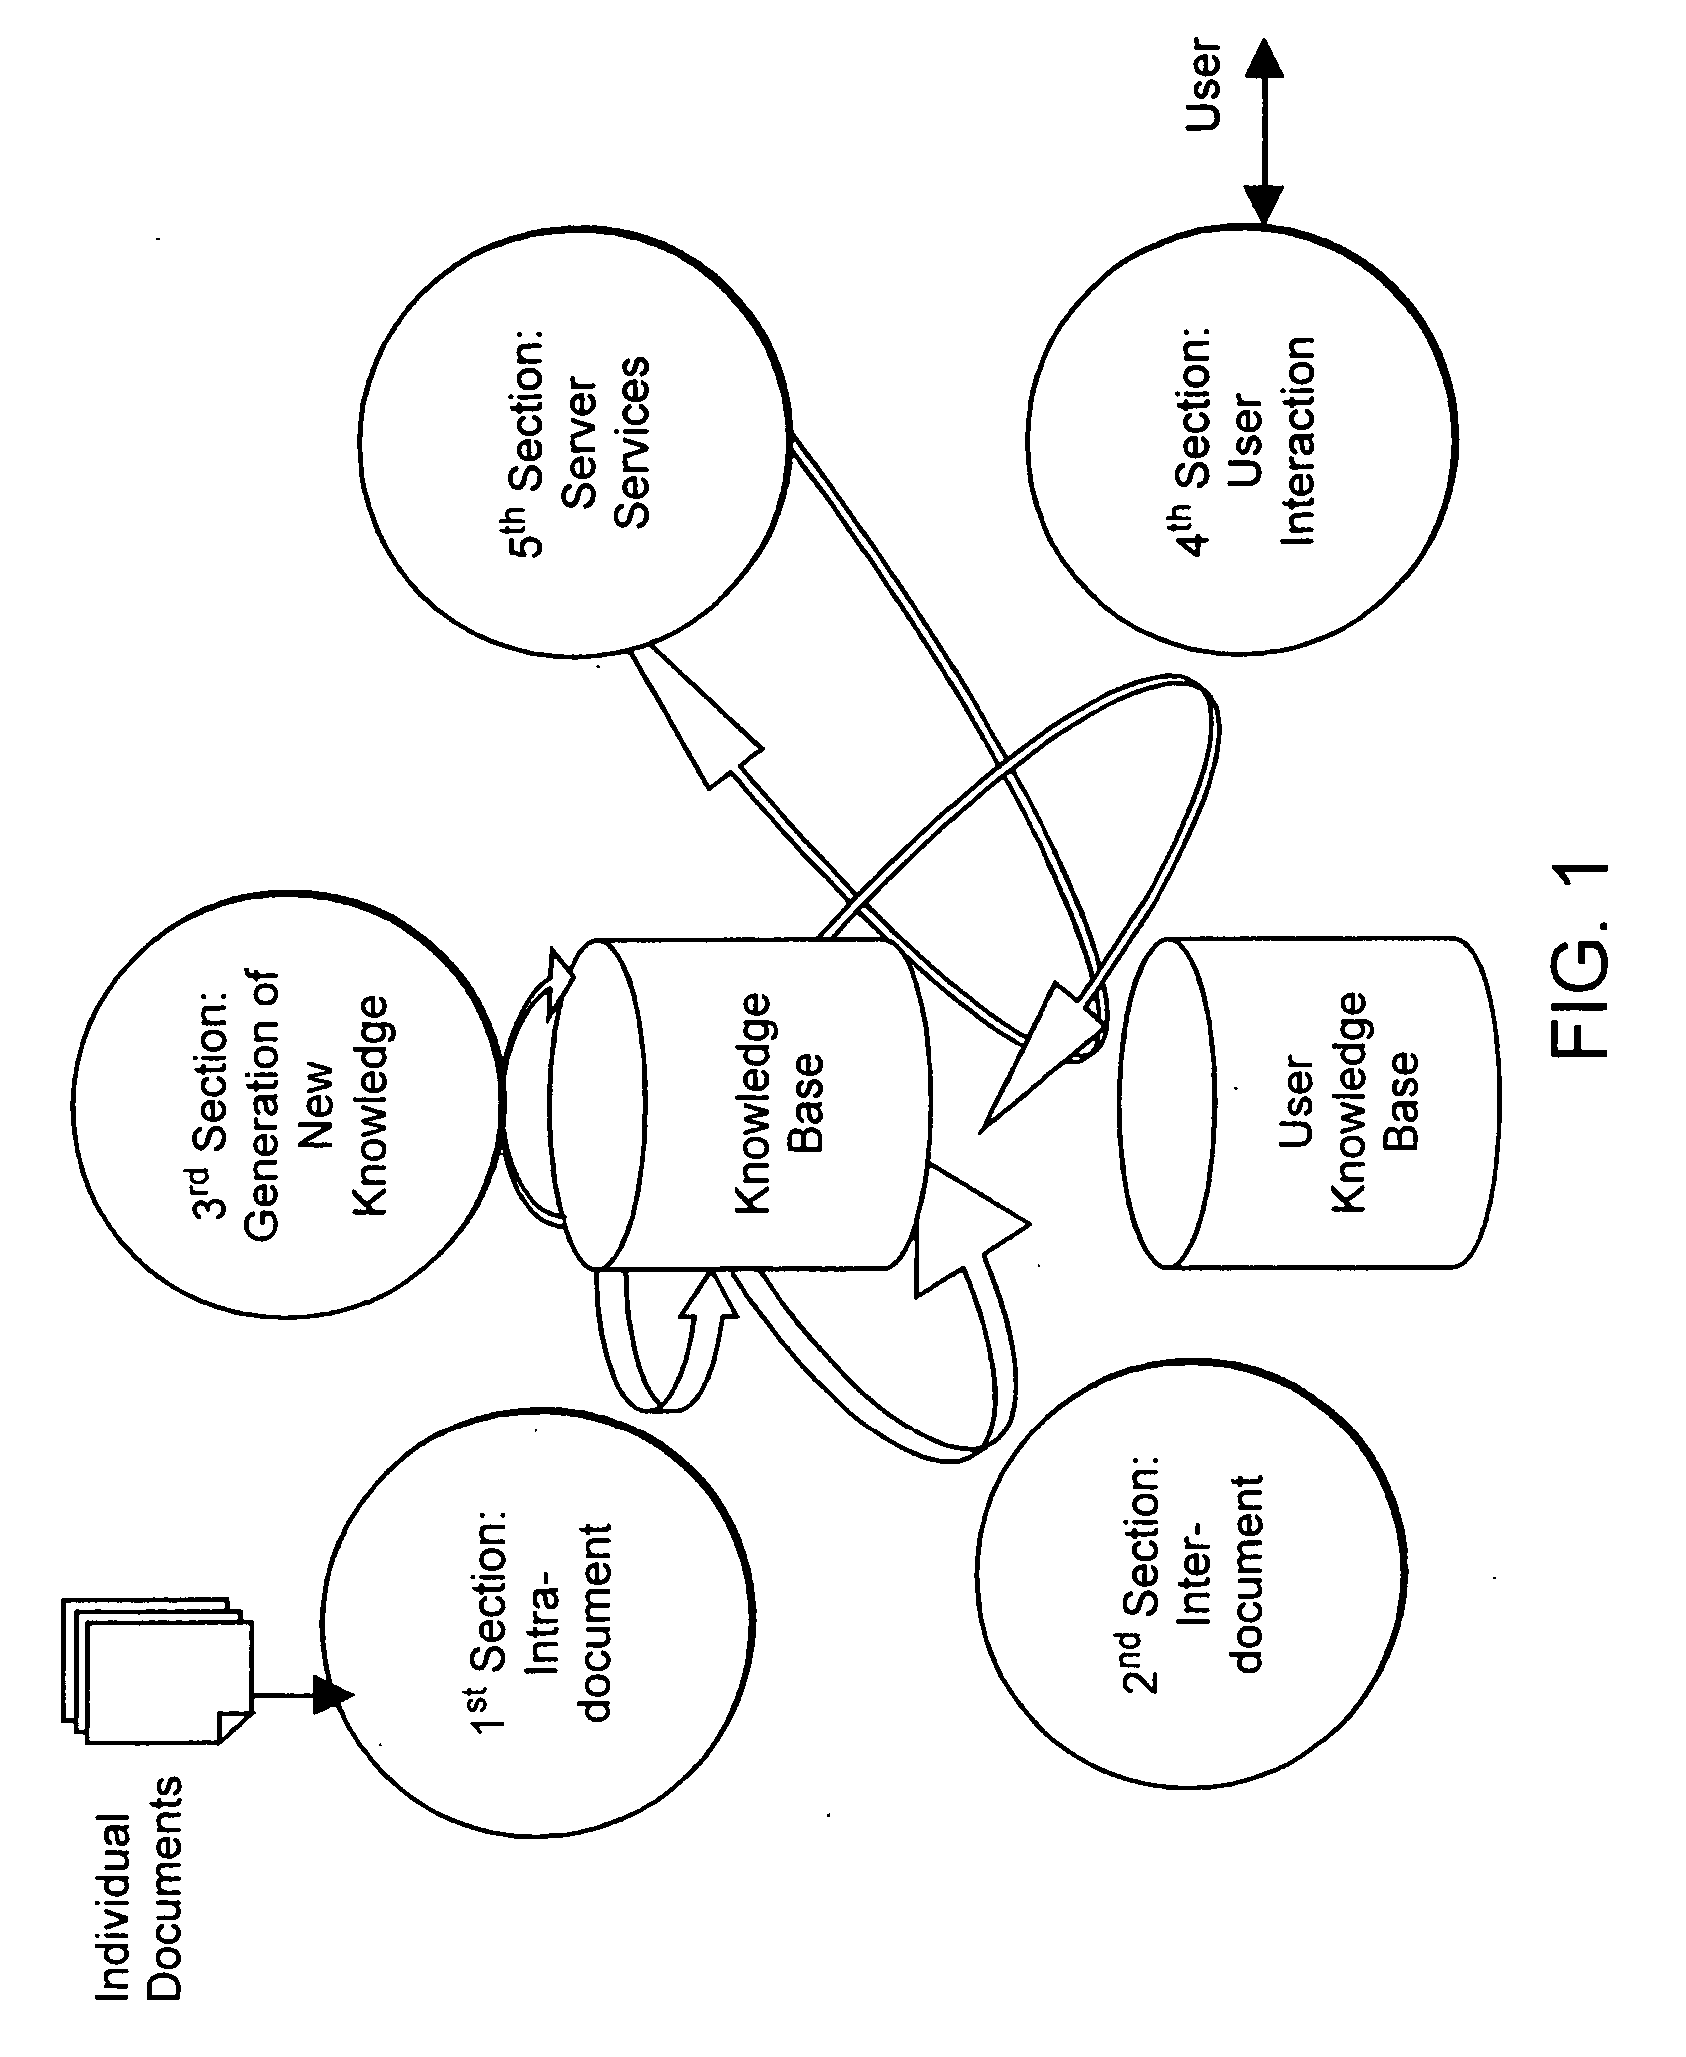 Methods and systems for automated semantic knowledge leveraging graph theoretic analysis and the inherent structure of communication